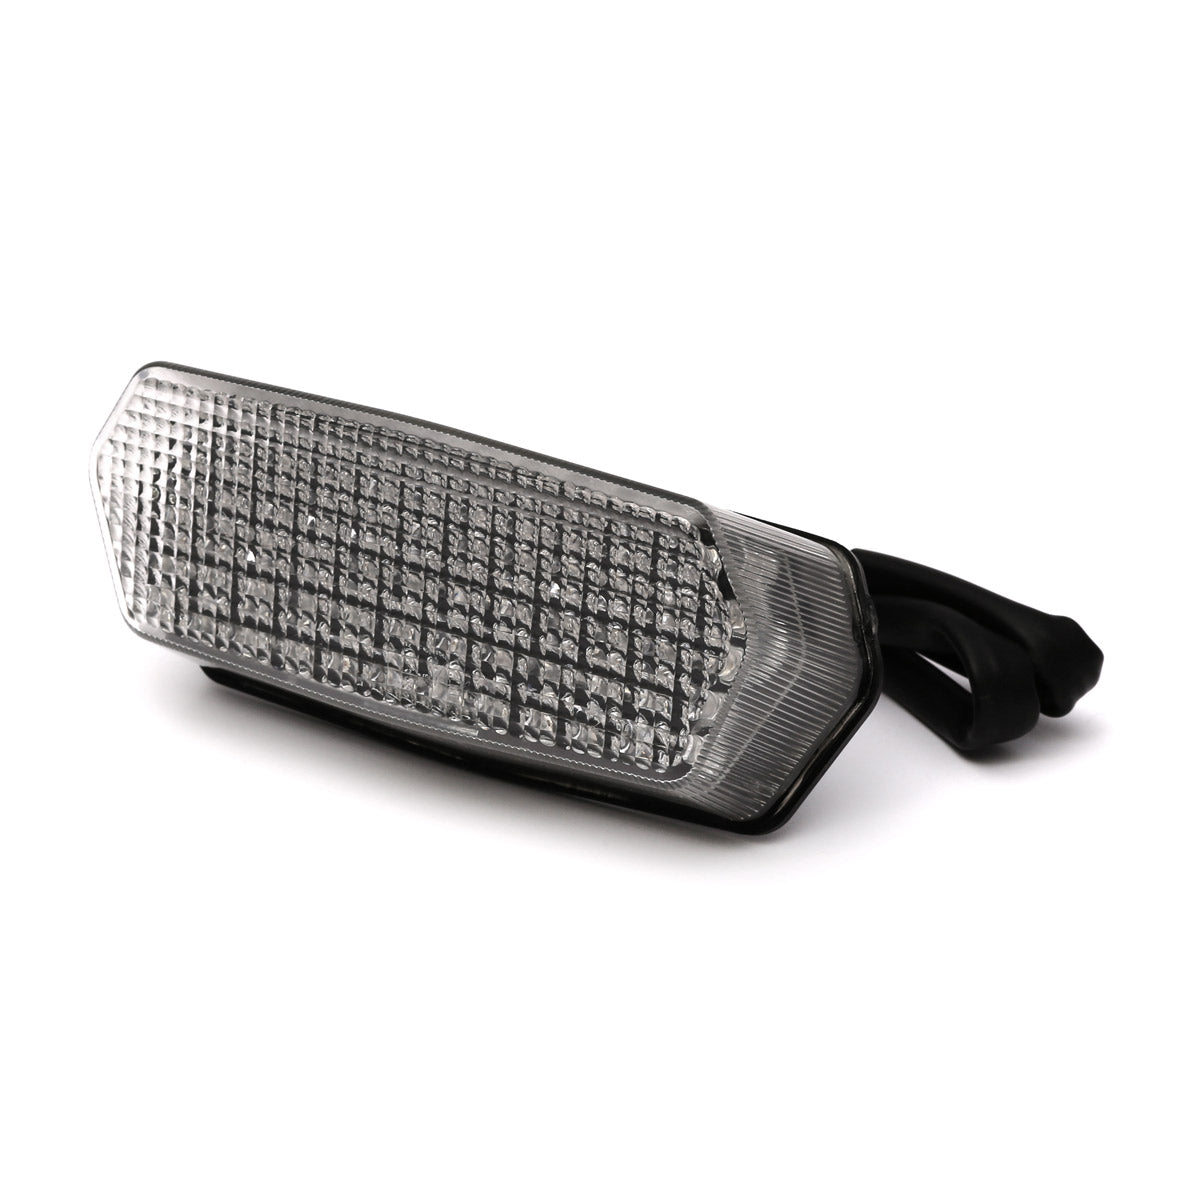 MDH Honda Grom 125 Integrated Sequential LED Tail Light (2013-2020)